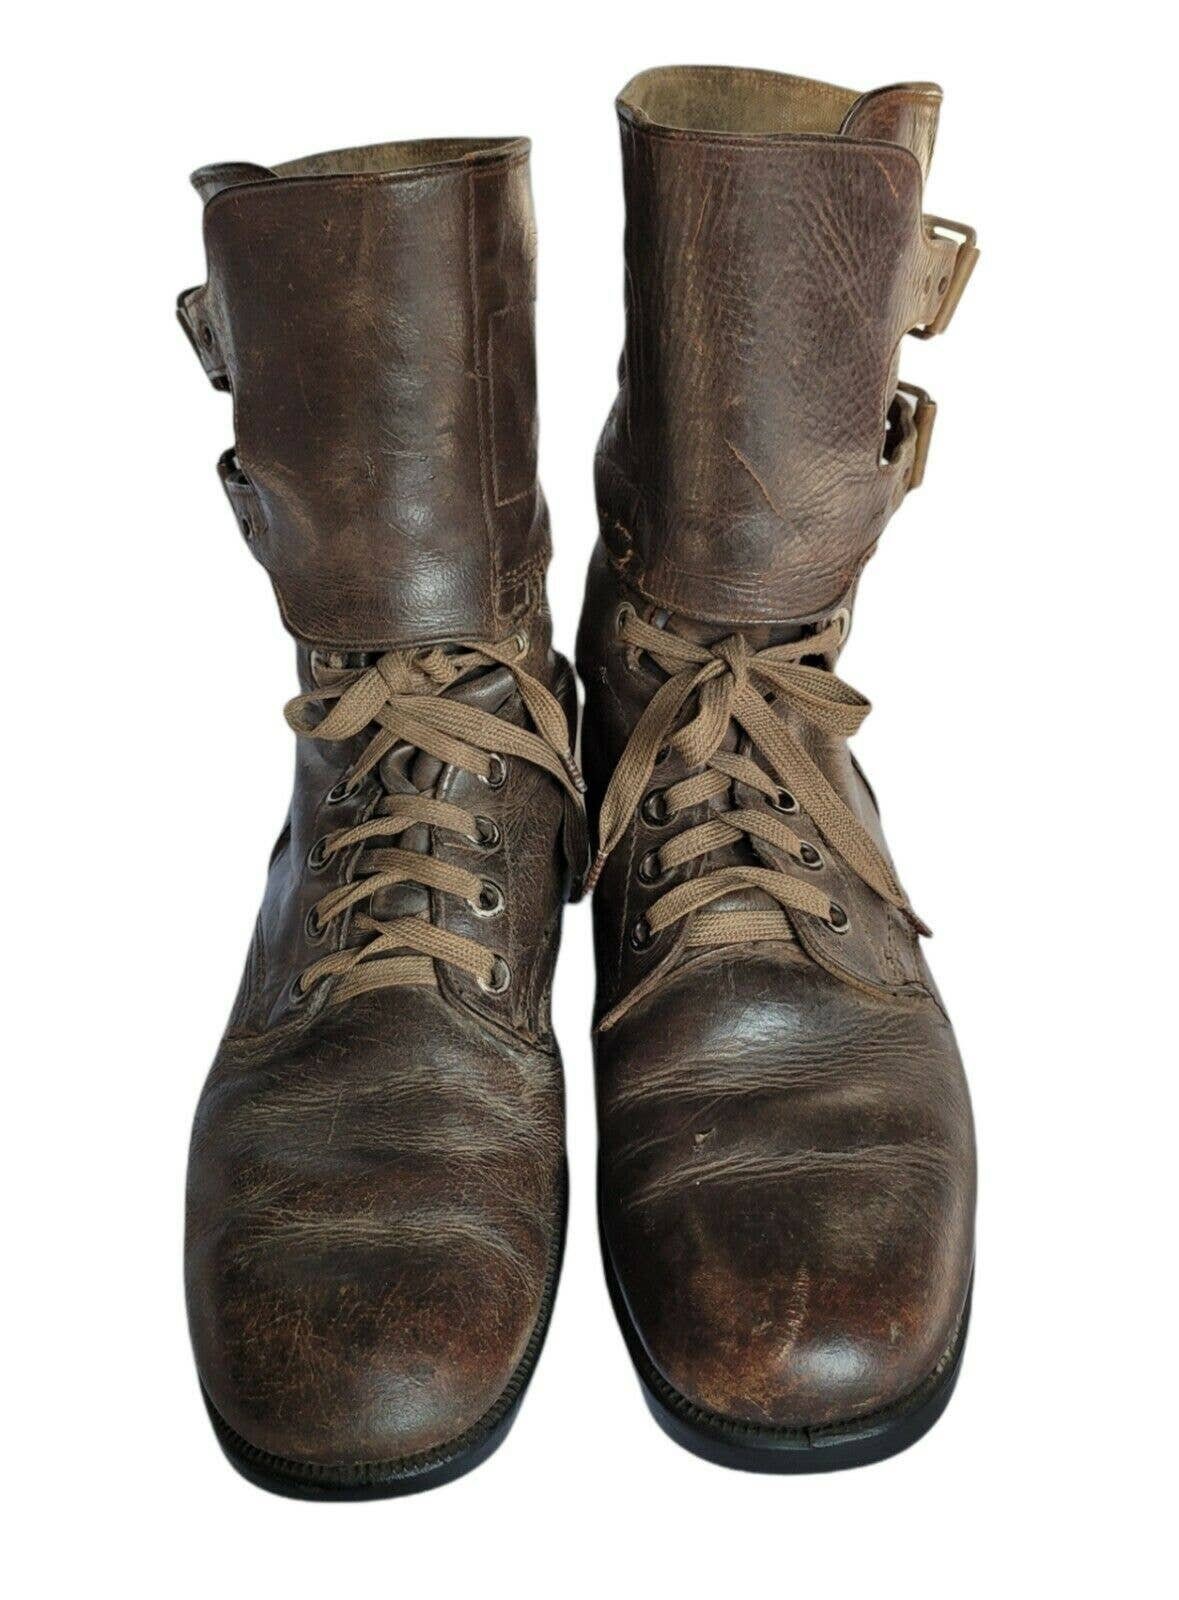 WWII WW2 US Double Buckle Brown Lined Cuff Leather Boots 10R - Etsy